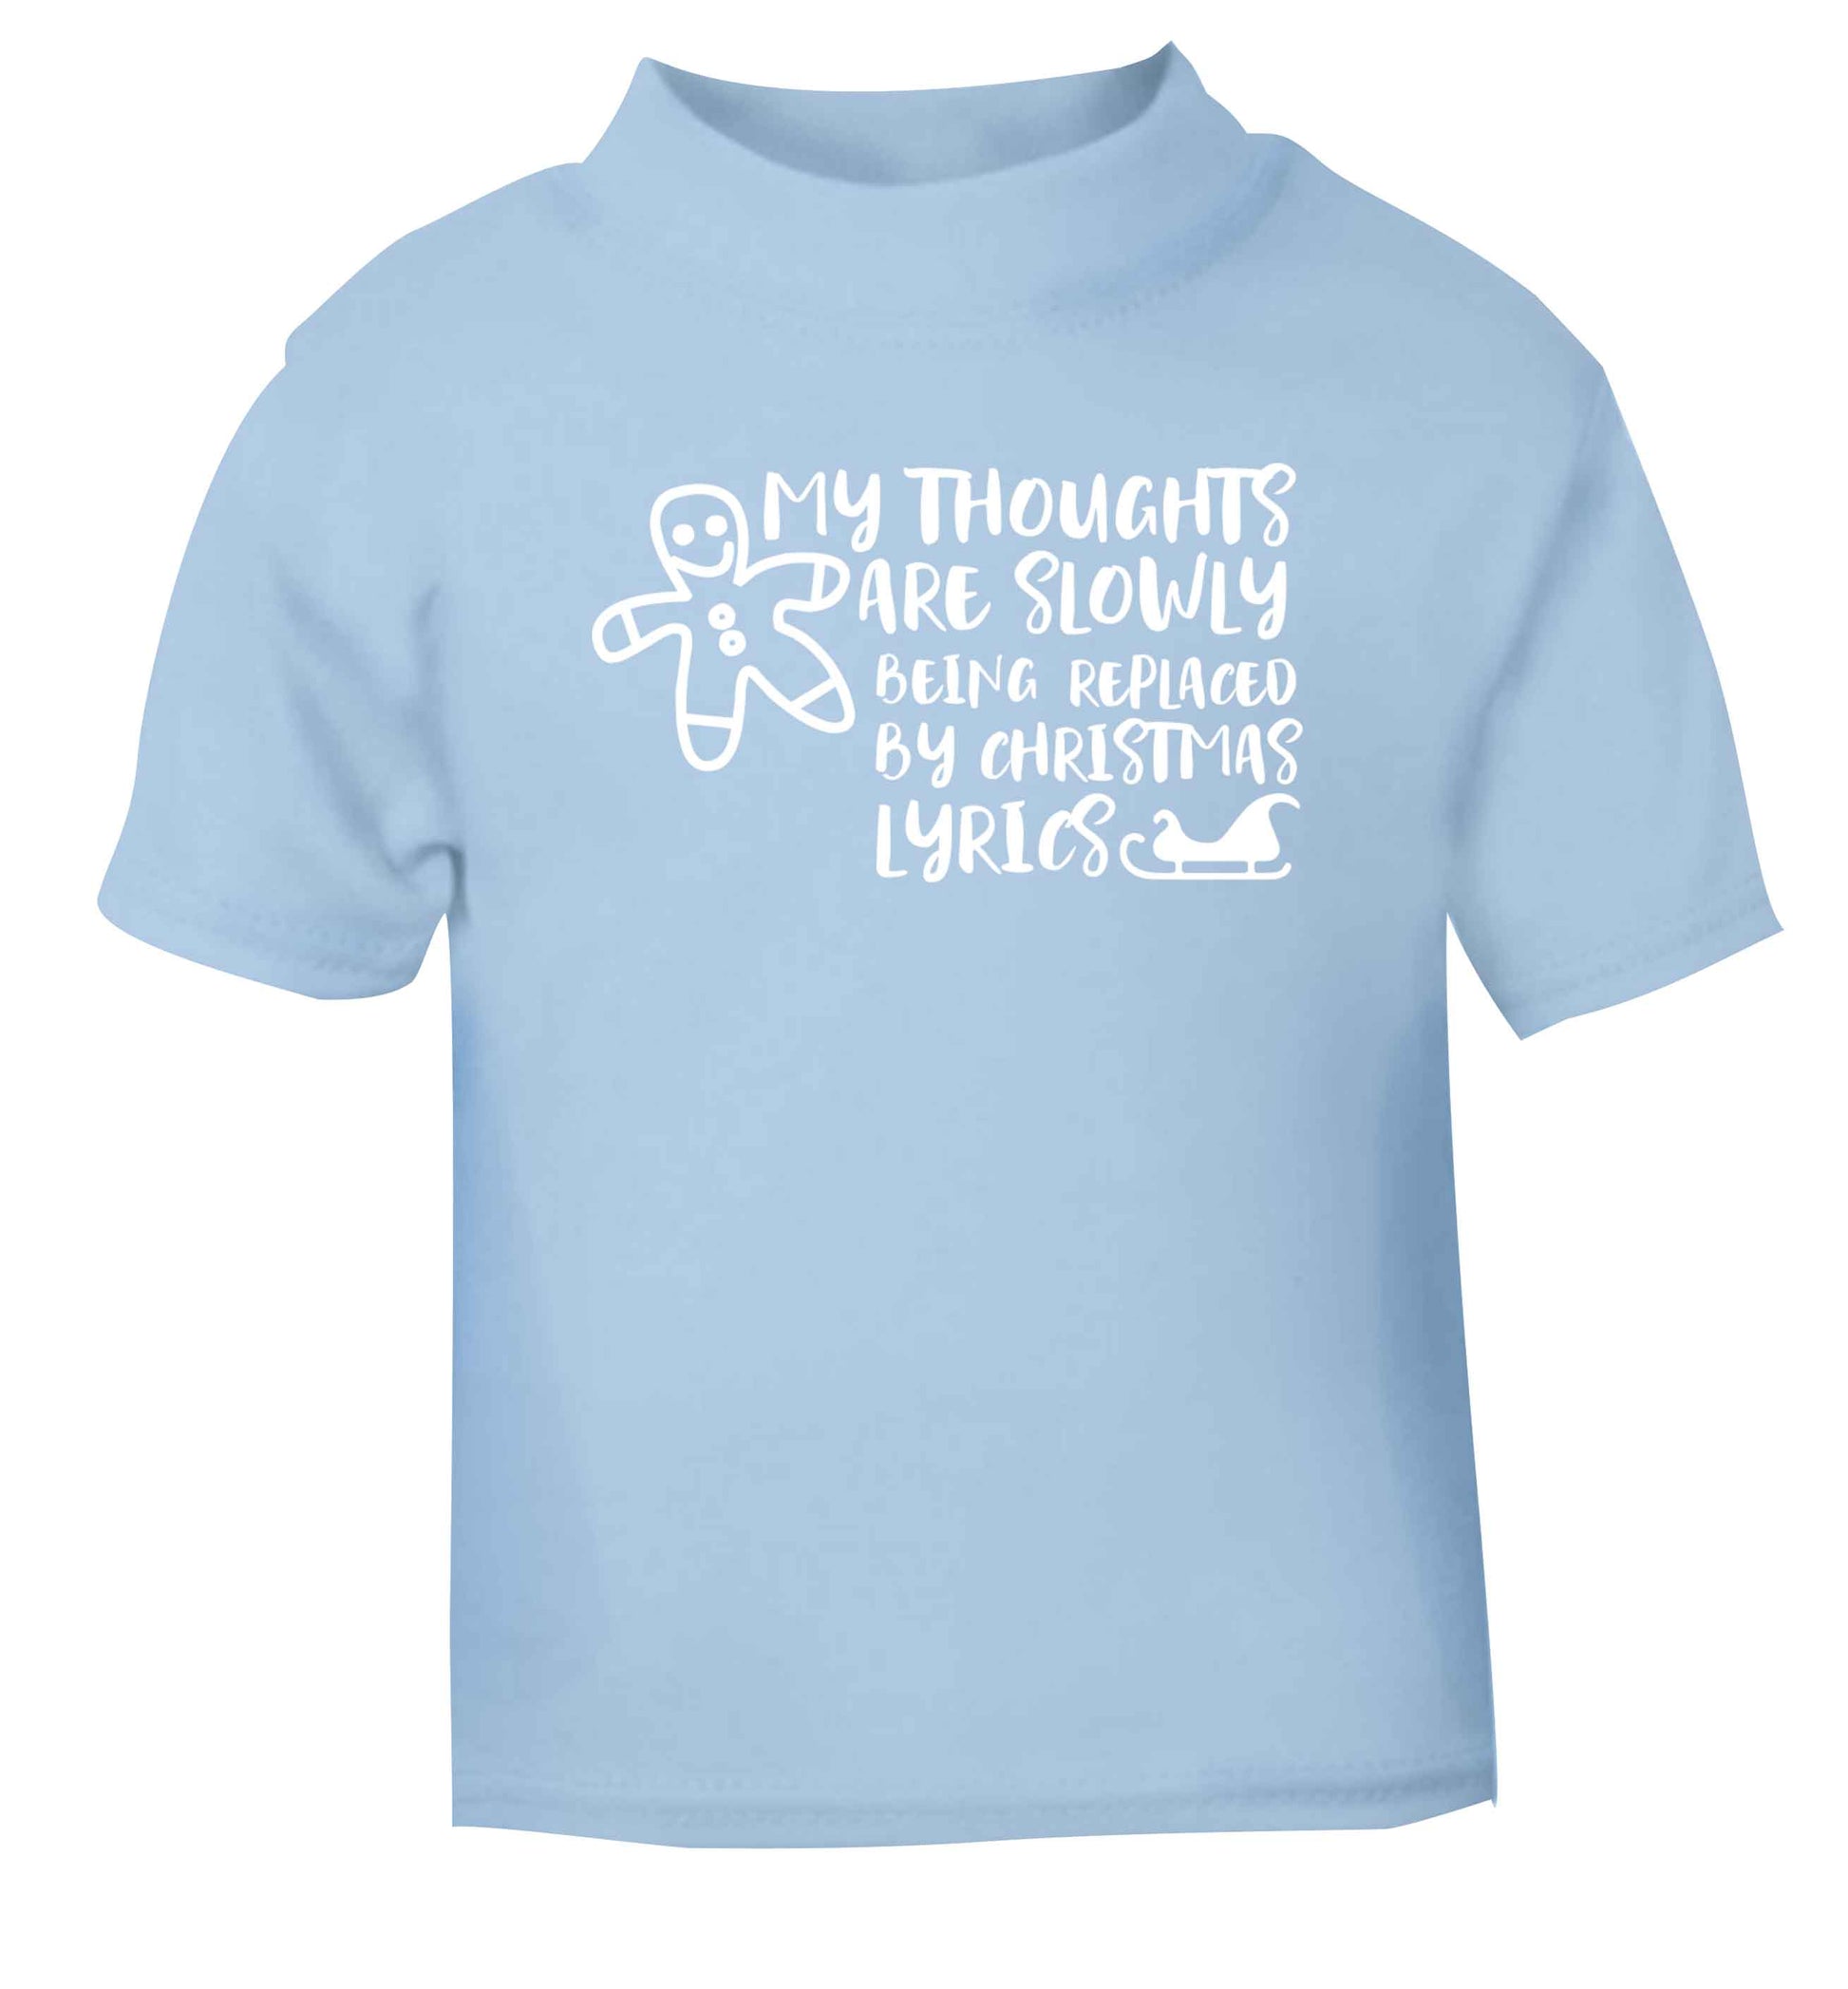 My thoughts are slowly being replaced by Christmas lyrics light blue Baby Toddler Tshirt 2 Years